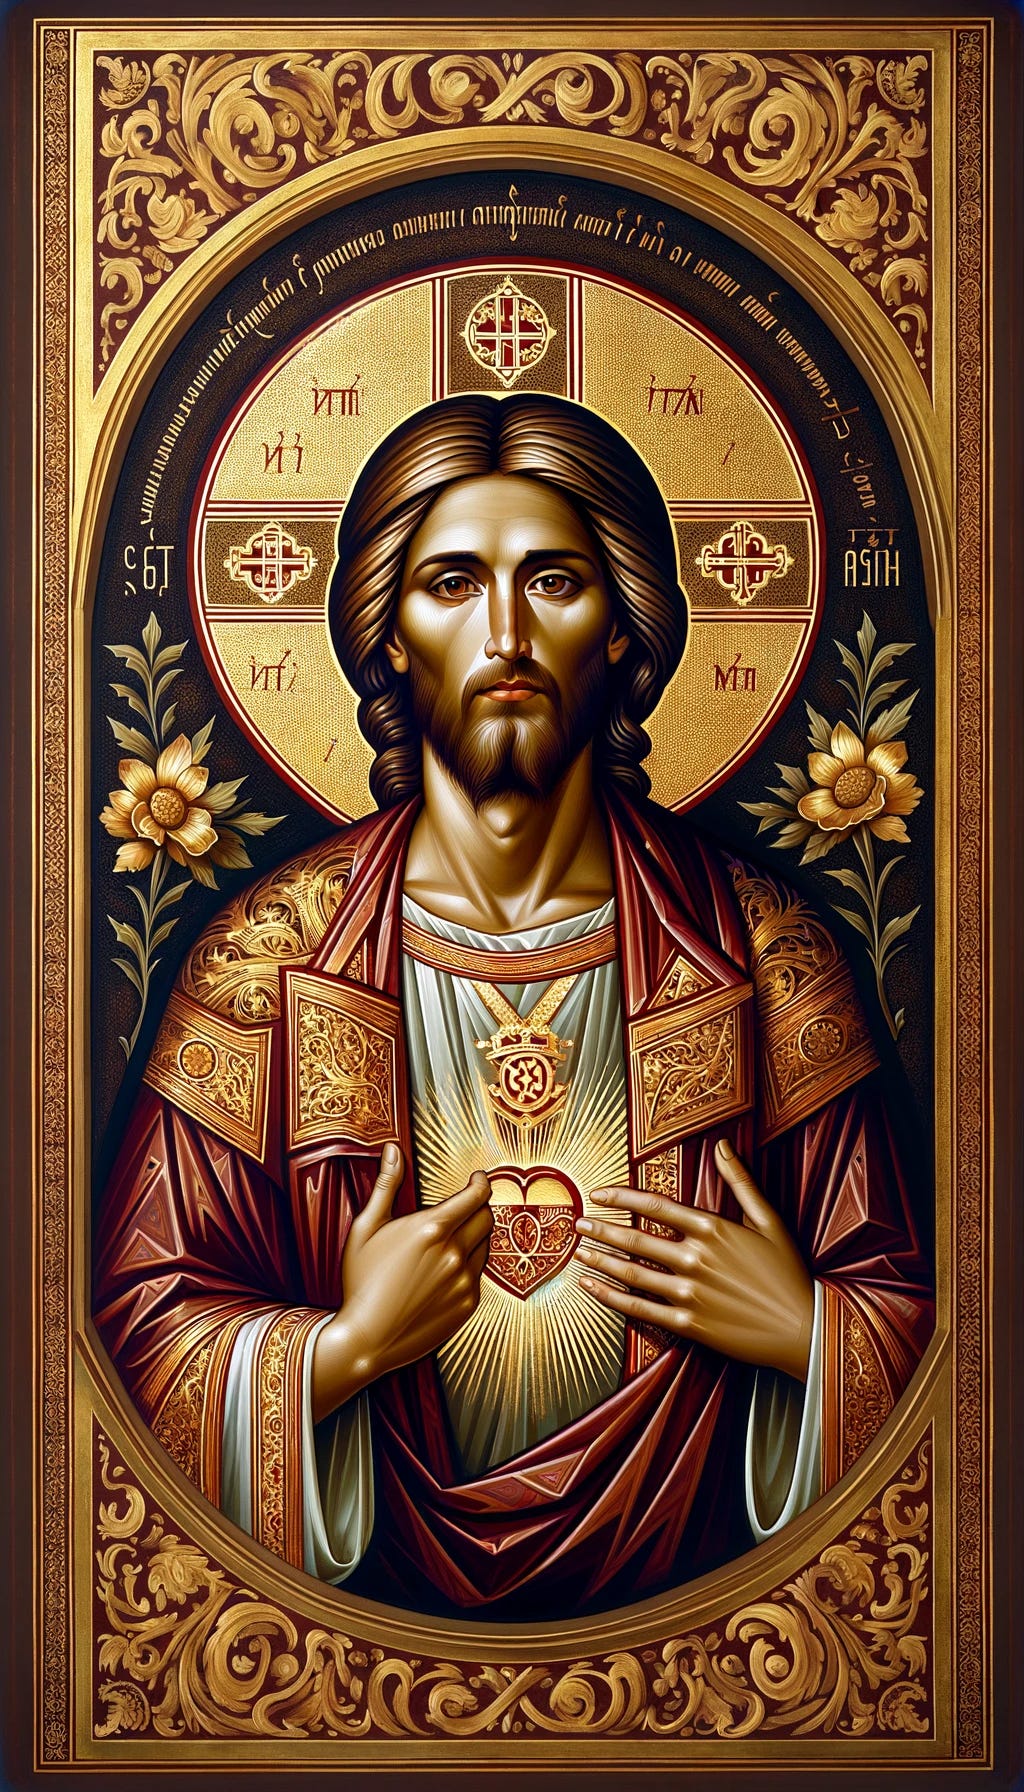 Create a traditional iconographic image depicting the Unio Hypostatica, the unique union of divine and human natures in Jesus Christ. Use classic Byzantine elements with gold leaf accents and a solemn, reverent tone. Jesus should be depicted with a serene and divine expression, wearing robes that symbolize both his divinity and humanity. Surround him with a radiant mandorla to symbolize divine glory. Include traditional iconographic elements such as a prominent halo and stylized facial features. The background should feature a blend of rich, deep colors and intricate patterns to emphasize the sacredness and uniqueness of this union. Ensure the style captures the profound mystery and reverence of the Unio Hypostatica, with no analogies to the earthly or heavenly spheres.